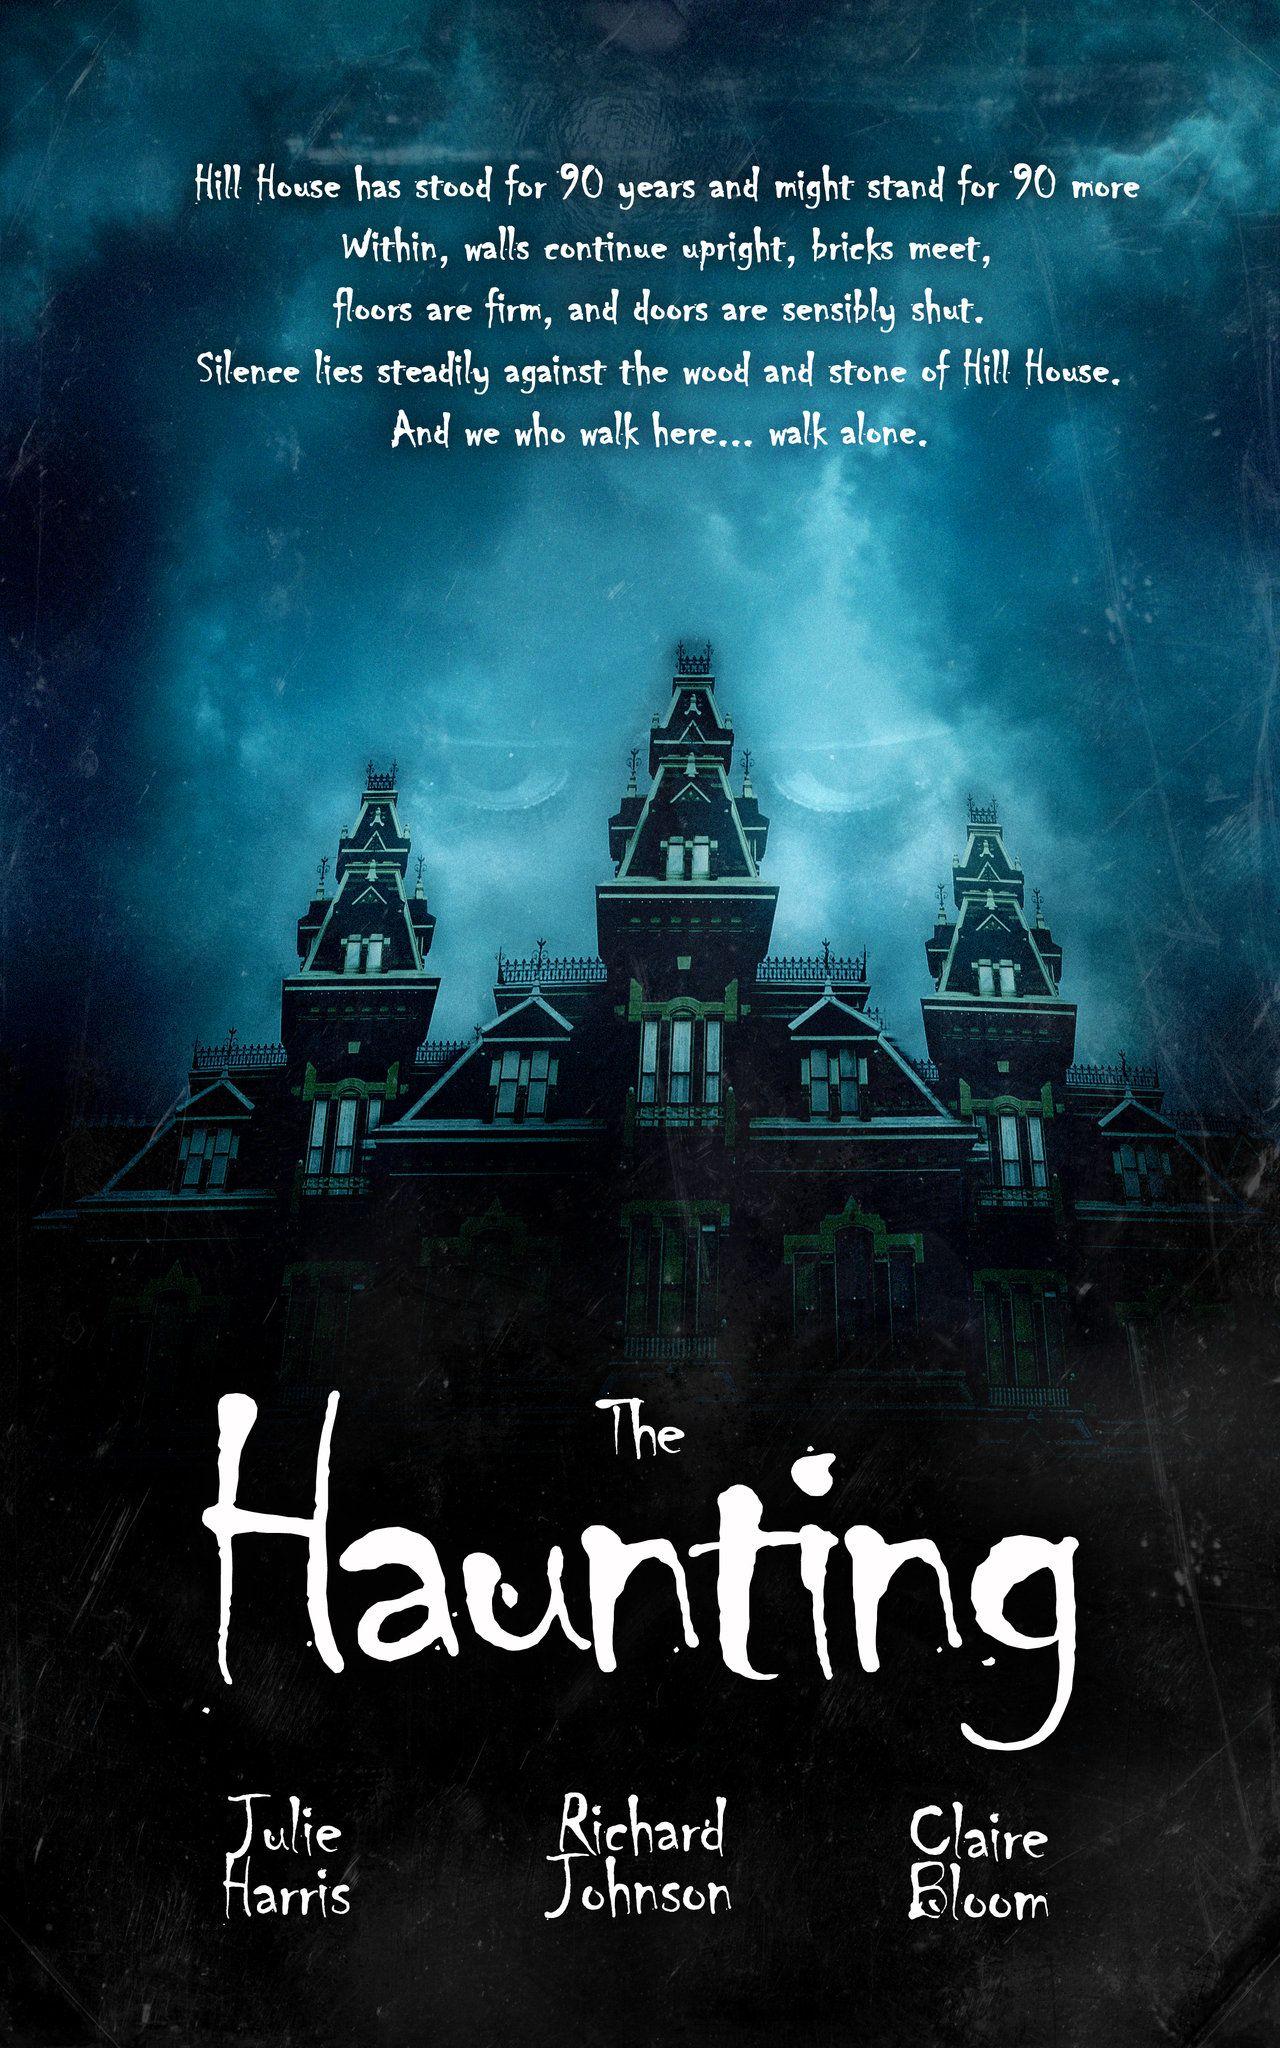 The Haunting image The Haunting HD wallpaper and background photo